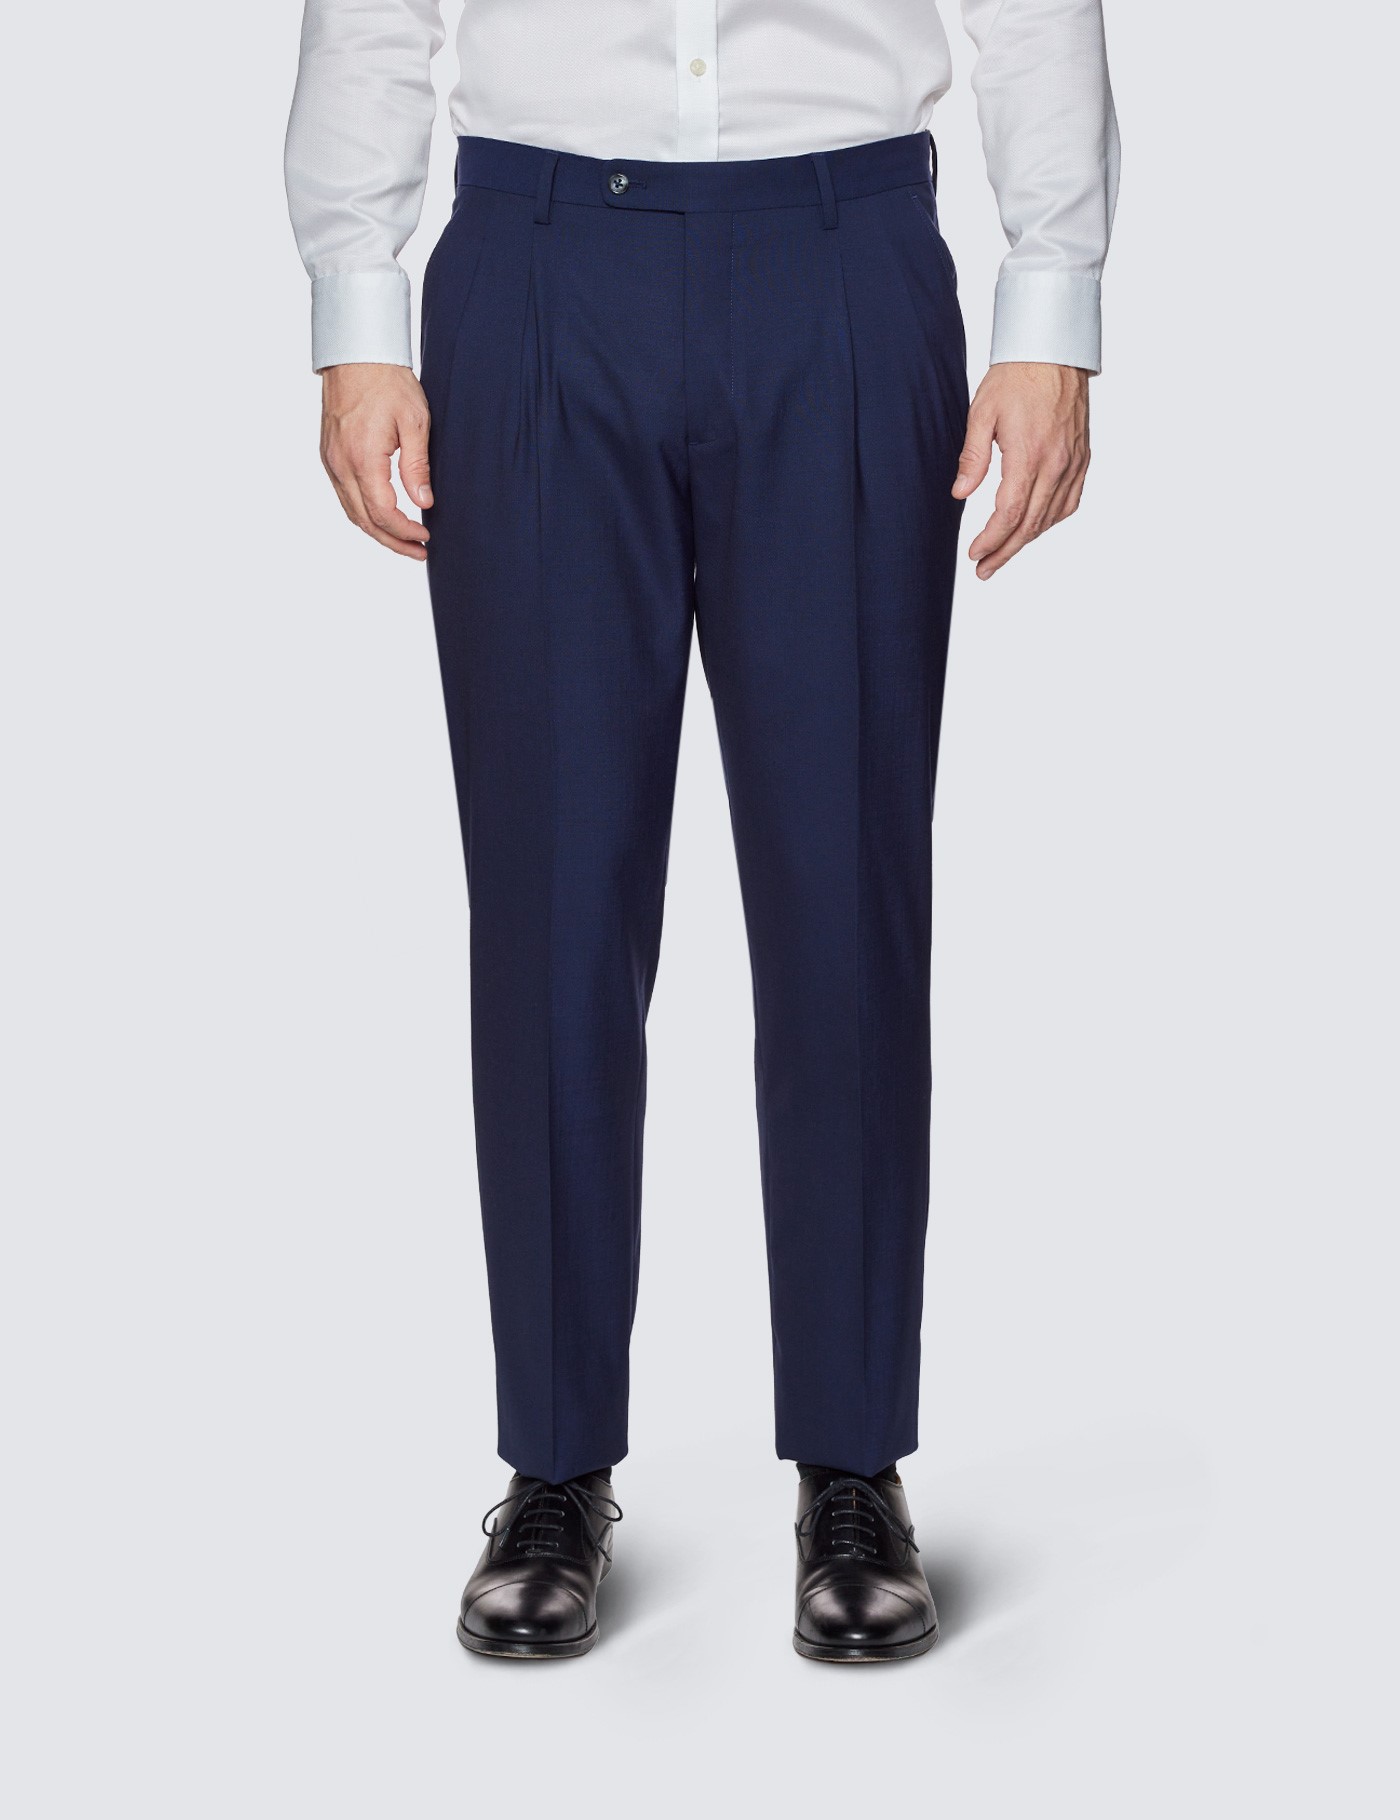 Men’s Navy Twill 100% Wool Pleated Trousers | Hawes & Curtis